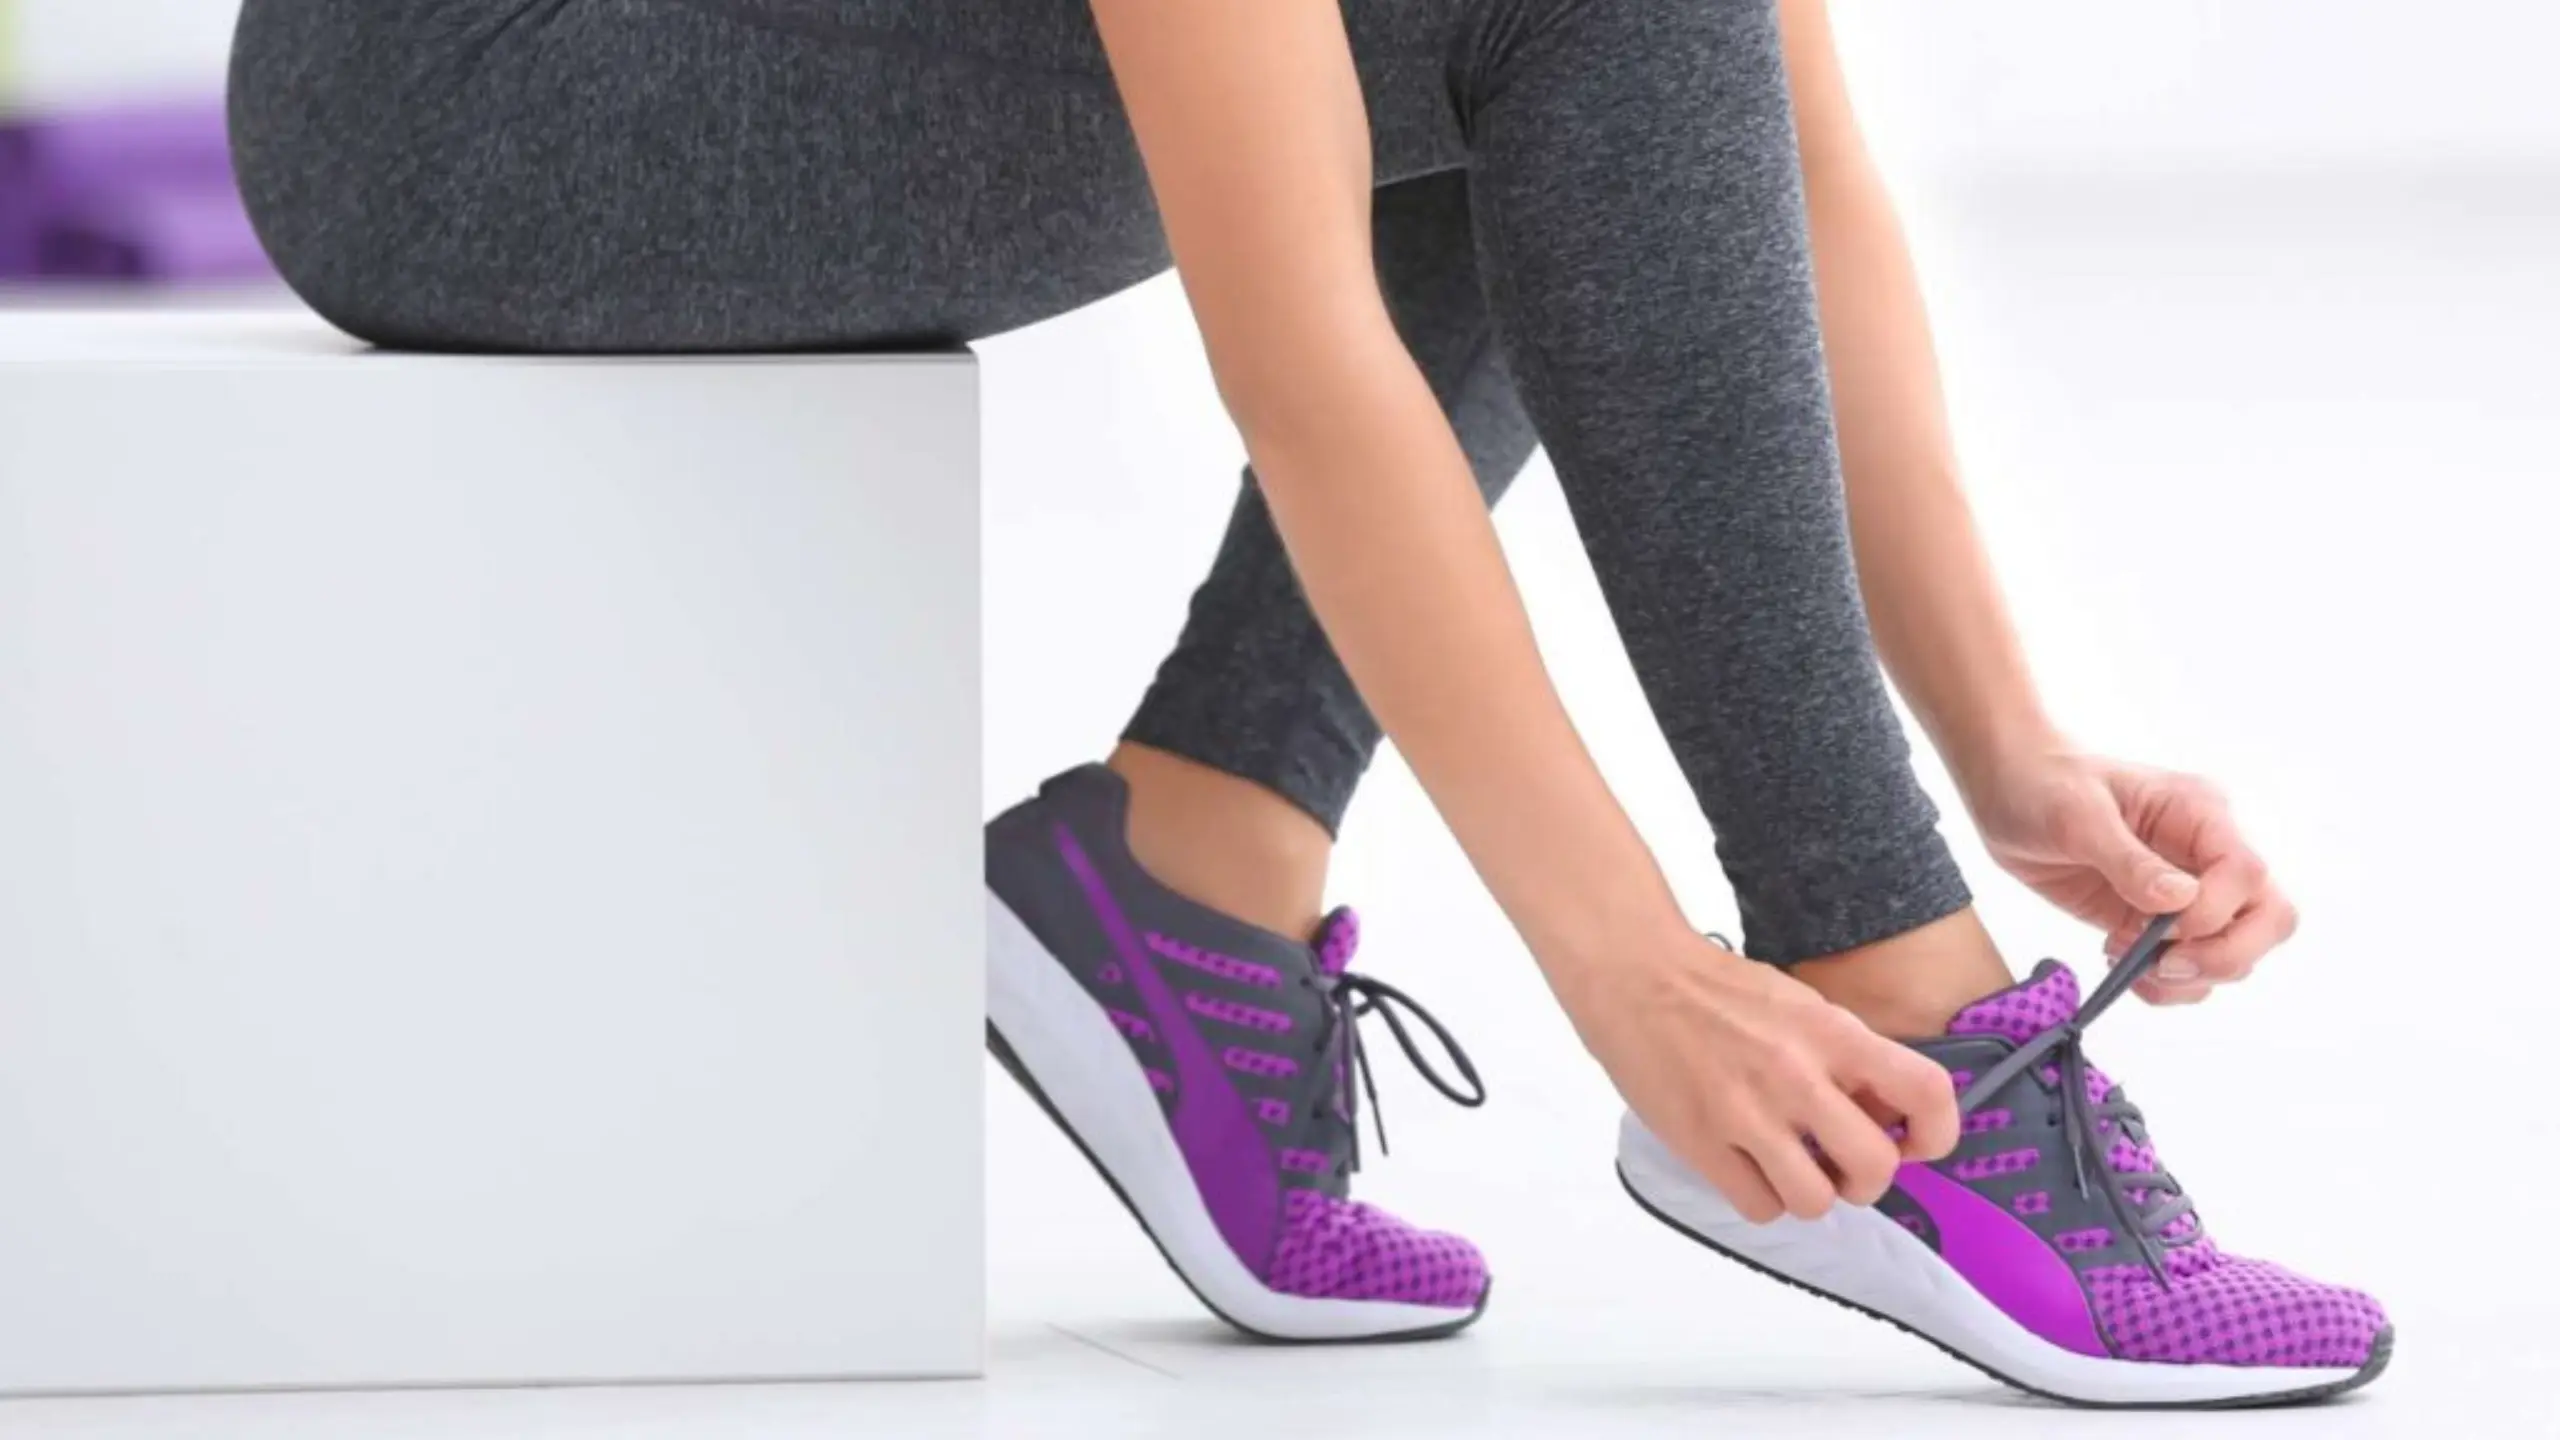 How to Pick Good Shoes for Sciatica